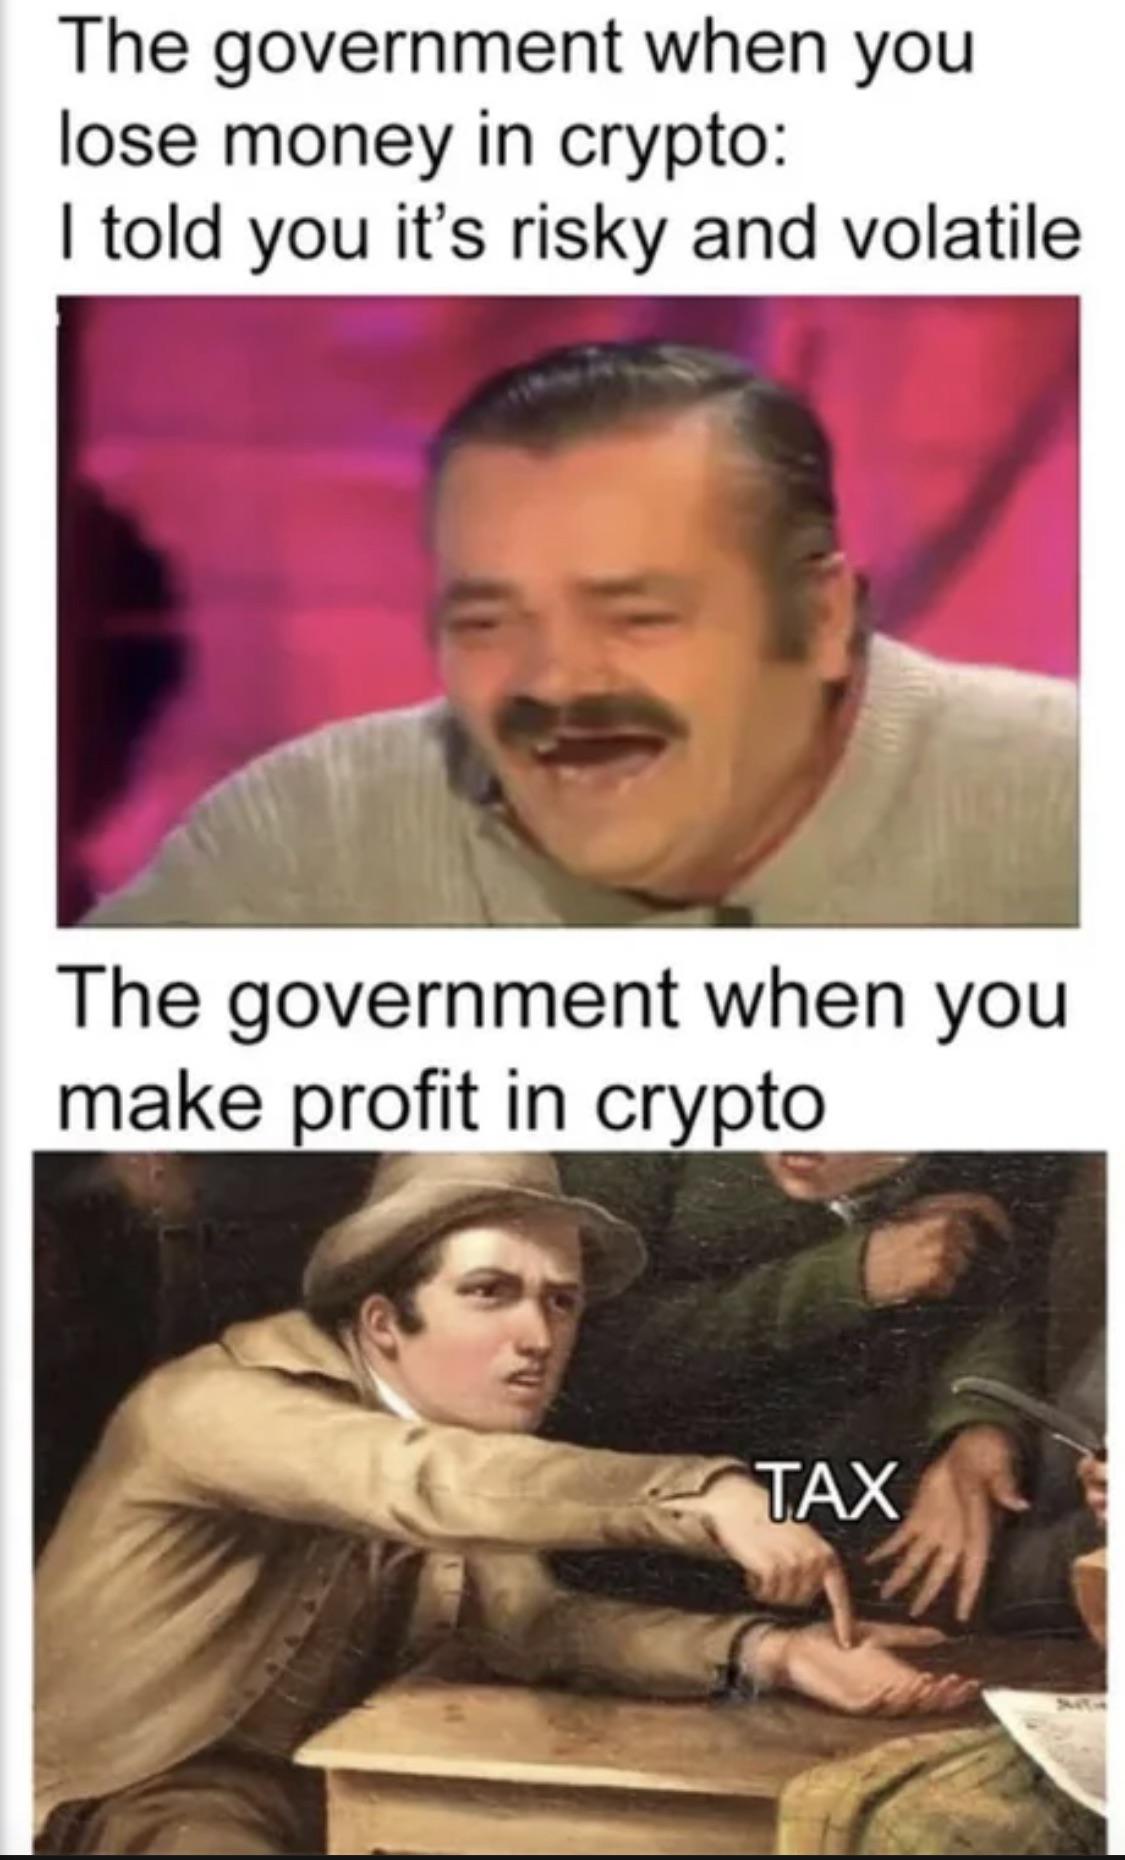 funny pics and cool randoms - crypto tax meme - The government when you lose money in crypto I told you it's risky and volatile The government when you make profit in crypto Tax